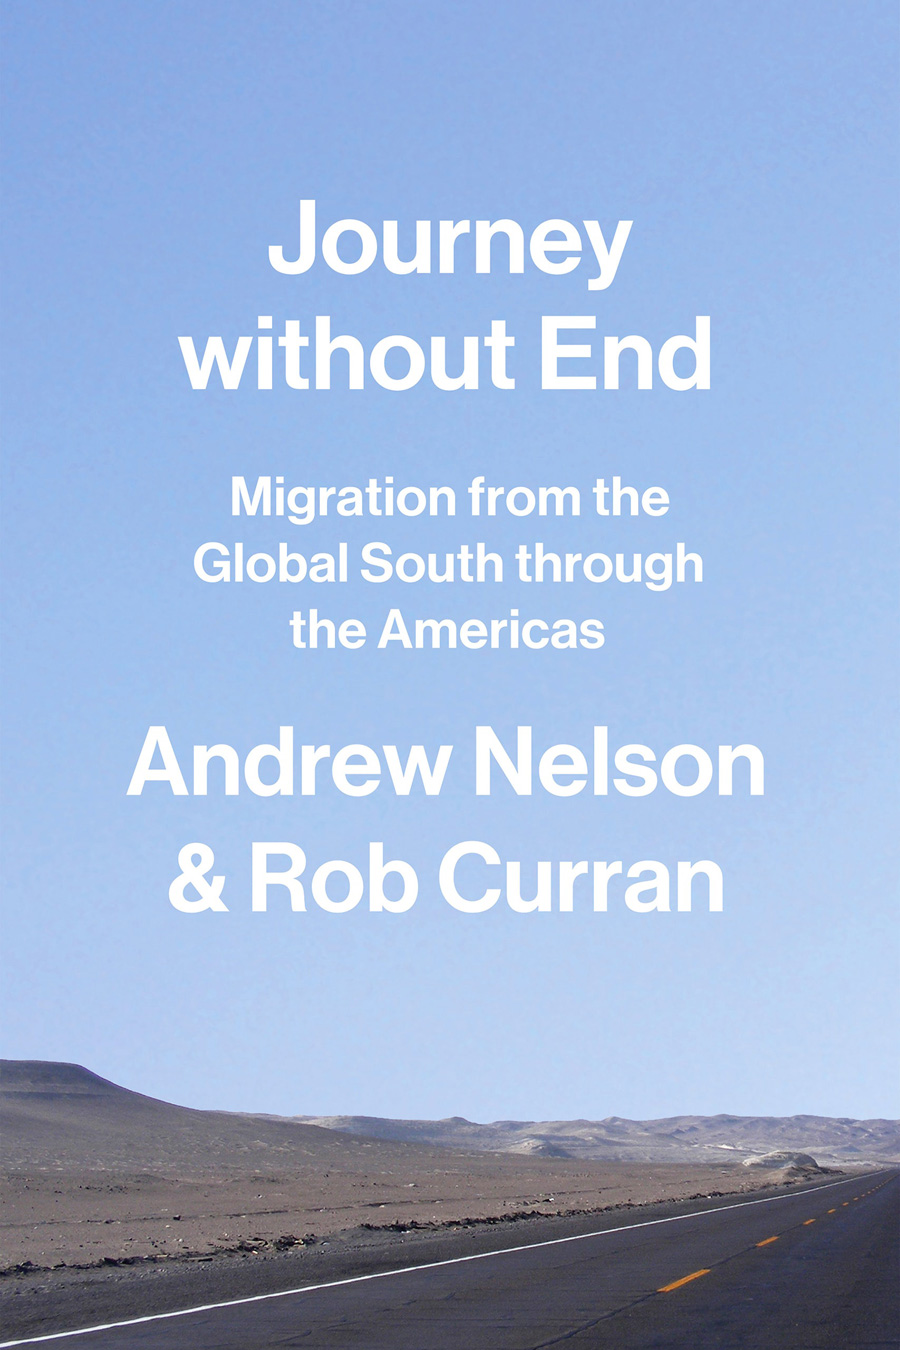 Journey without End: Migration from the Global South through the Americas